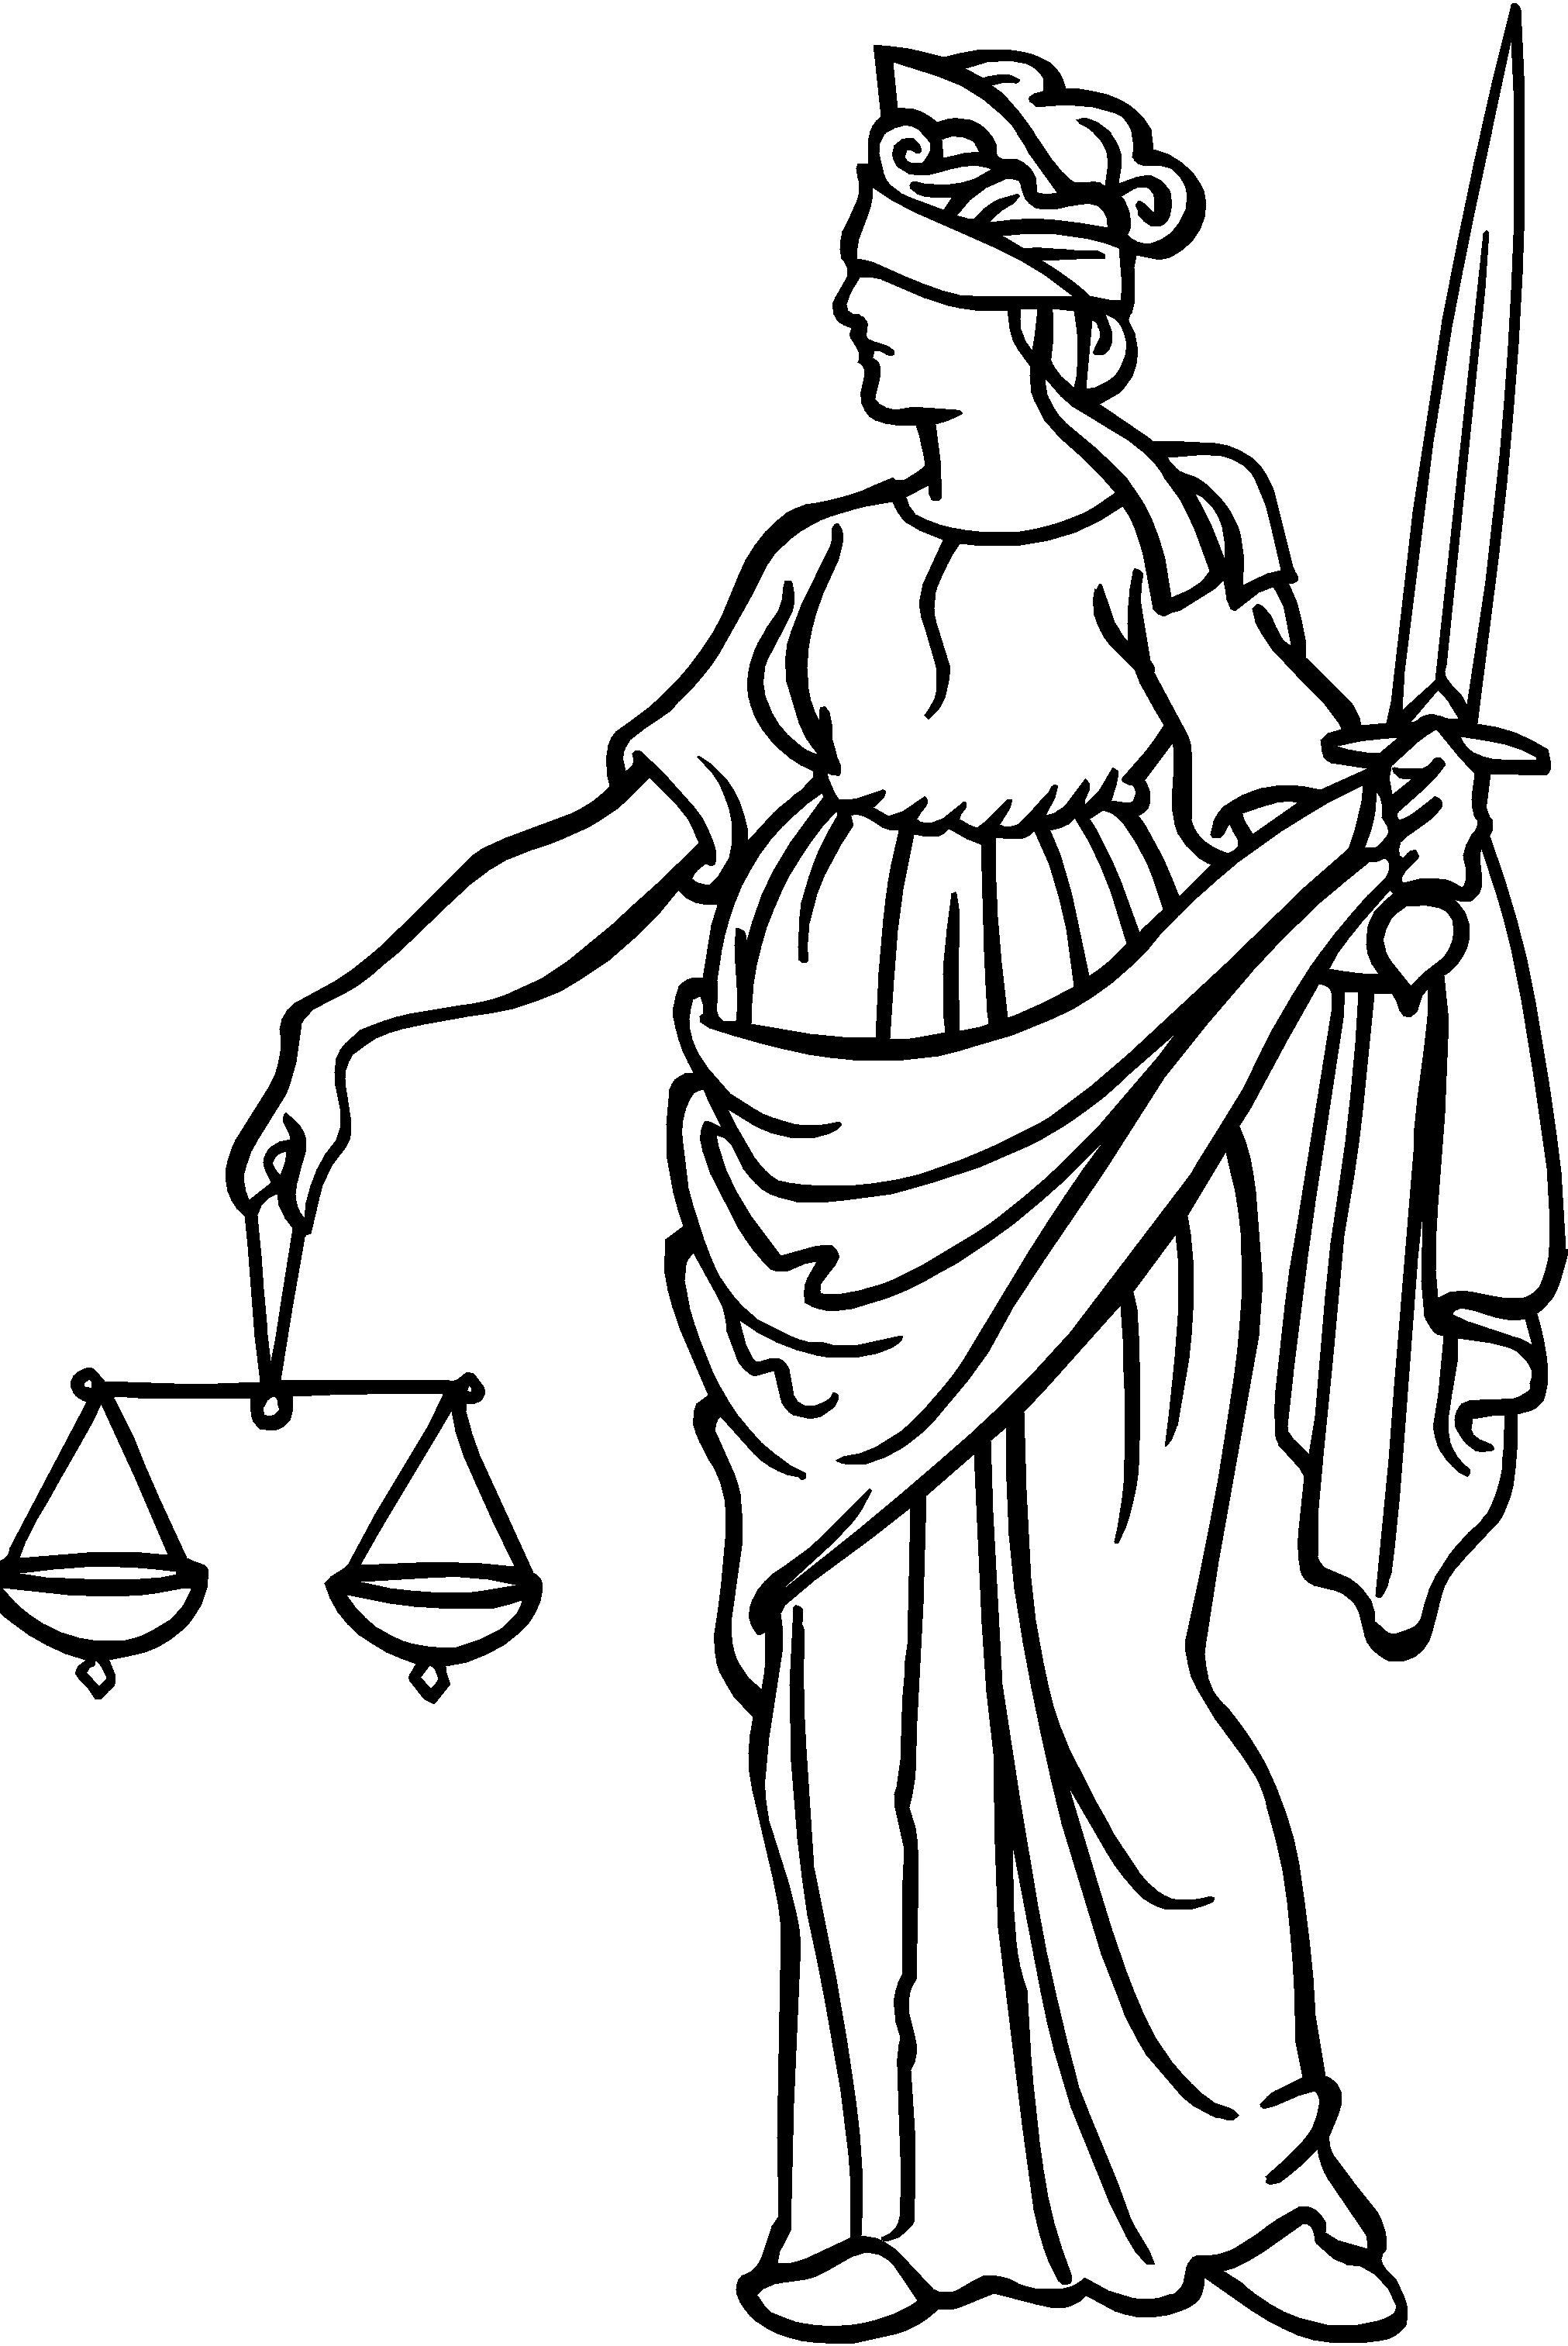 Images For > Supreme Court Clipart